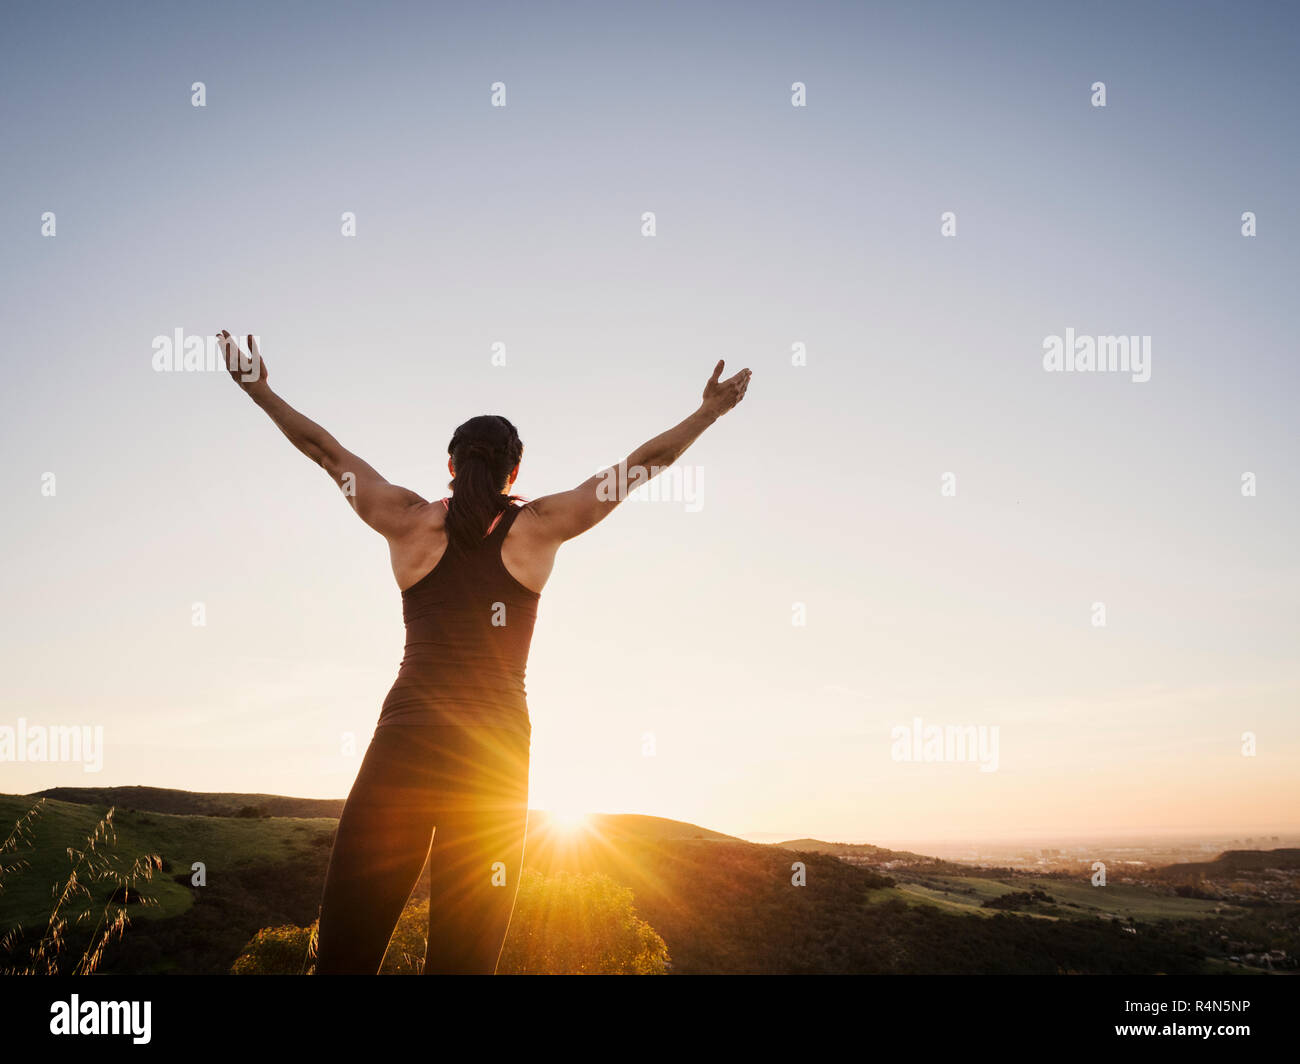 Rear view of woman with arms raised at sunset Stock Photo